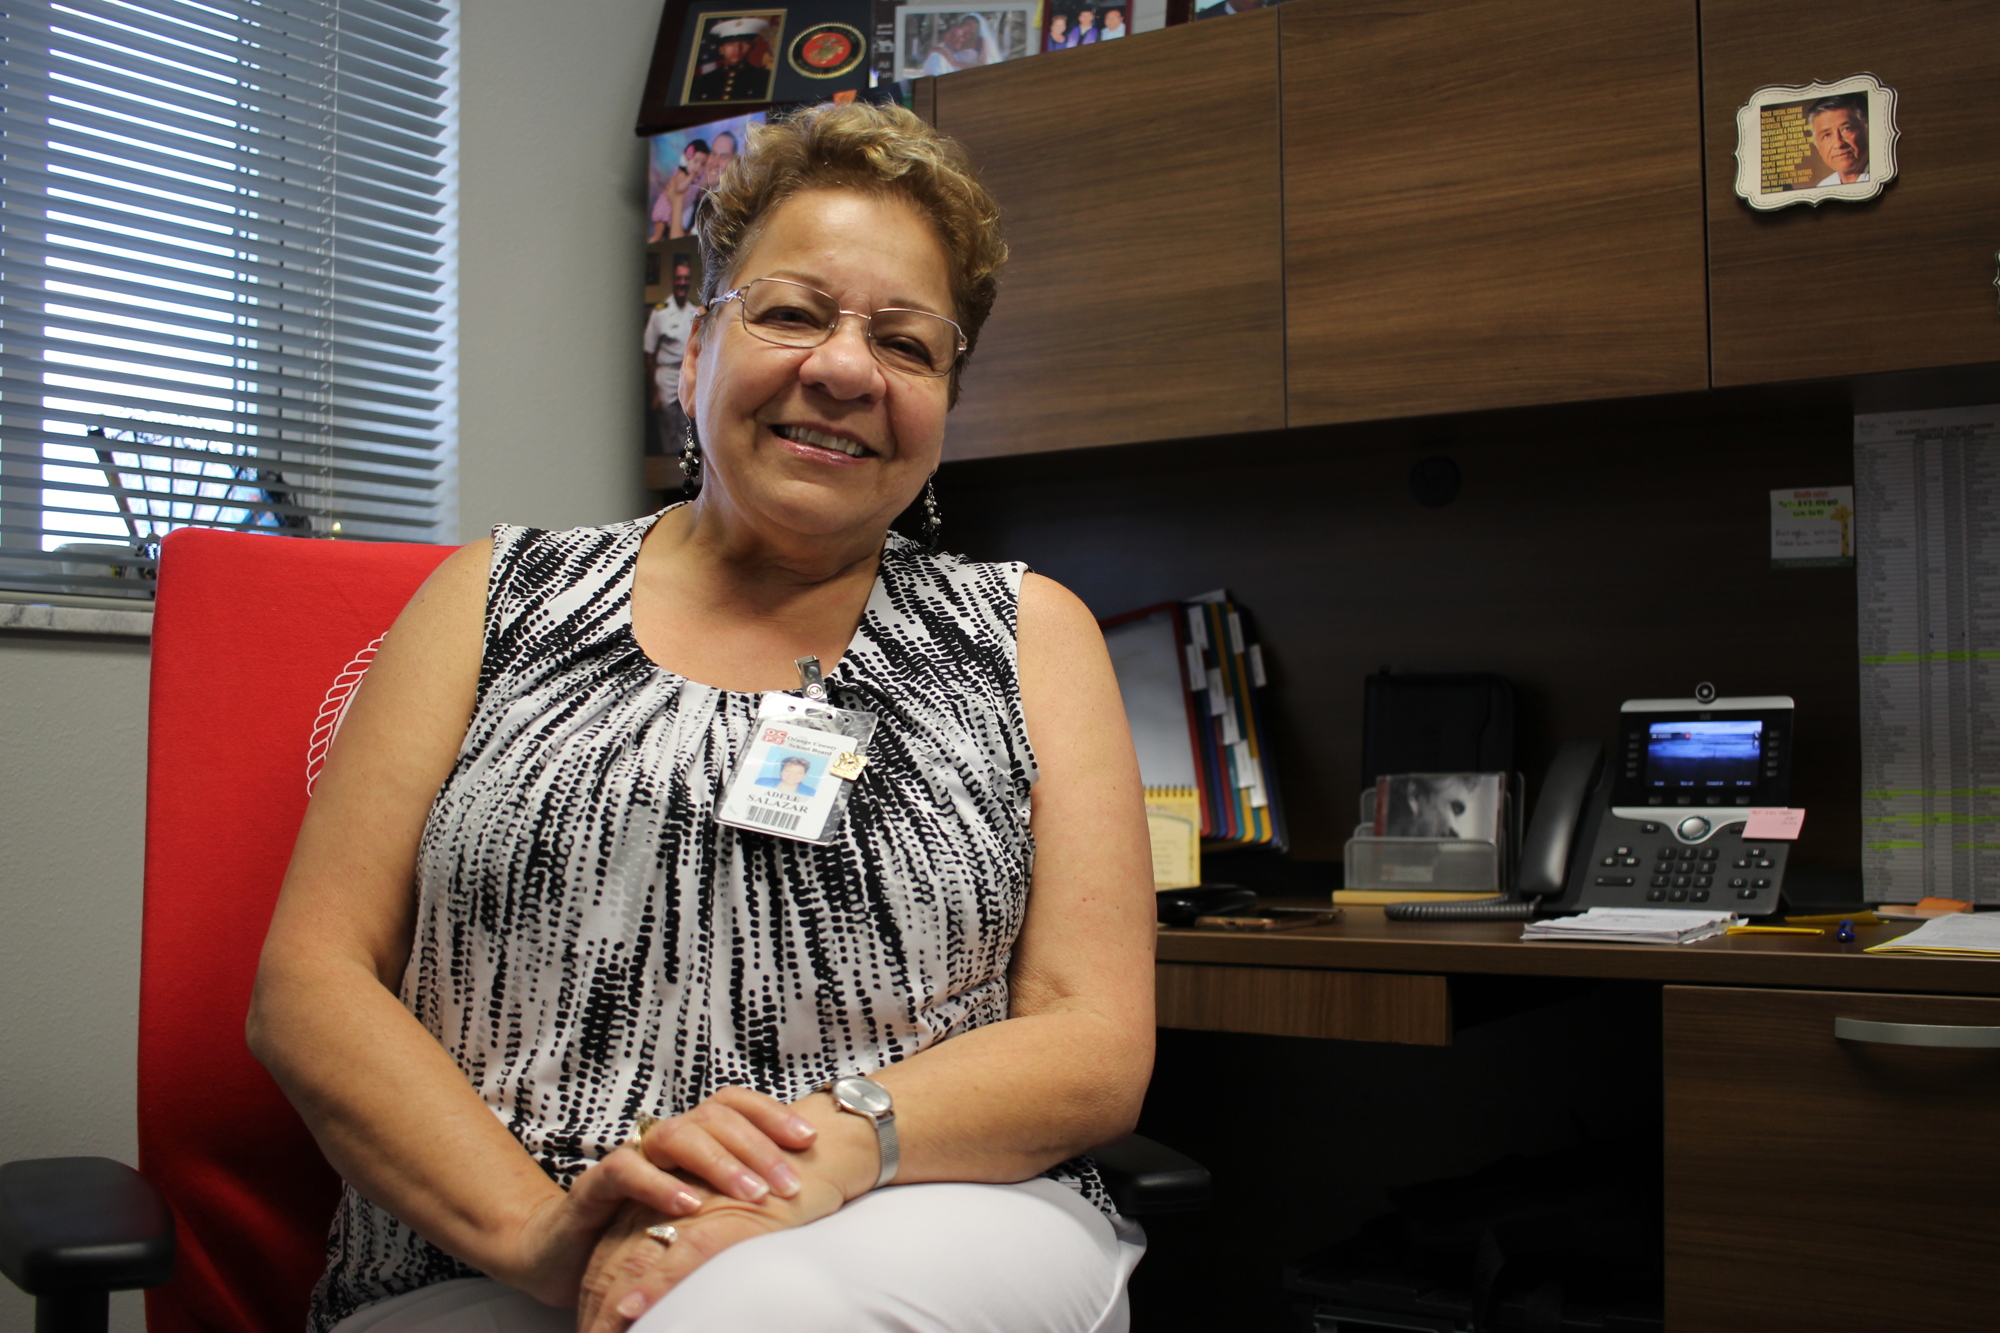 Adele Salazar is a lifelong educator and one of Windermere High’s new assistant principals.